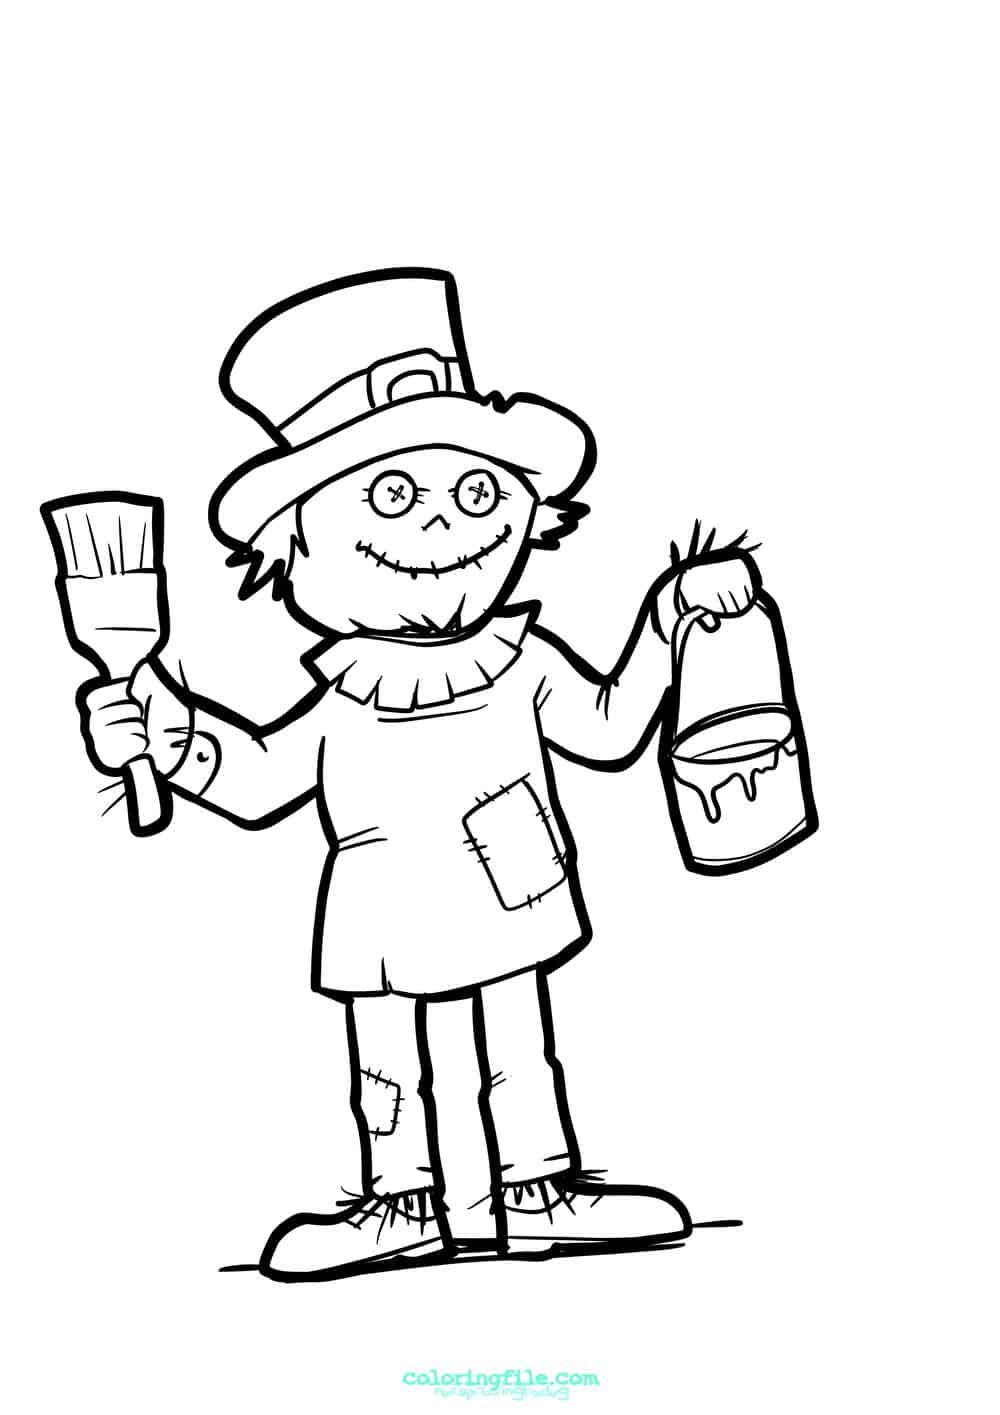 Scarecrow halloween coloring pages